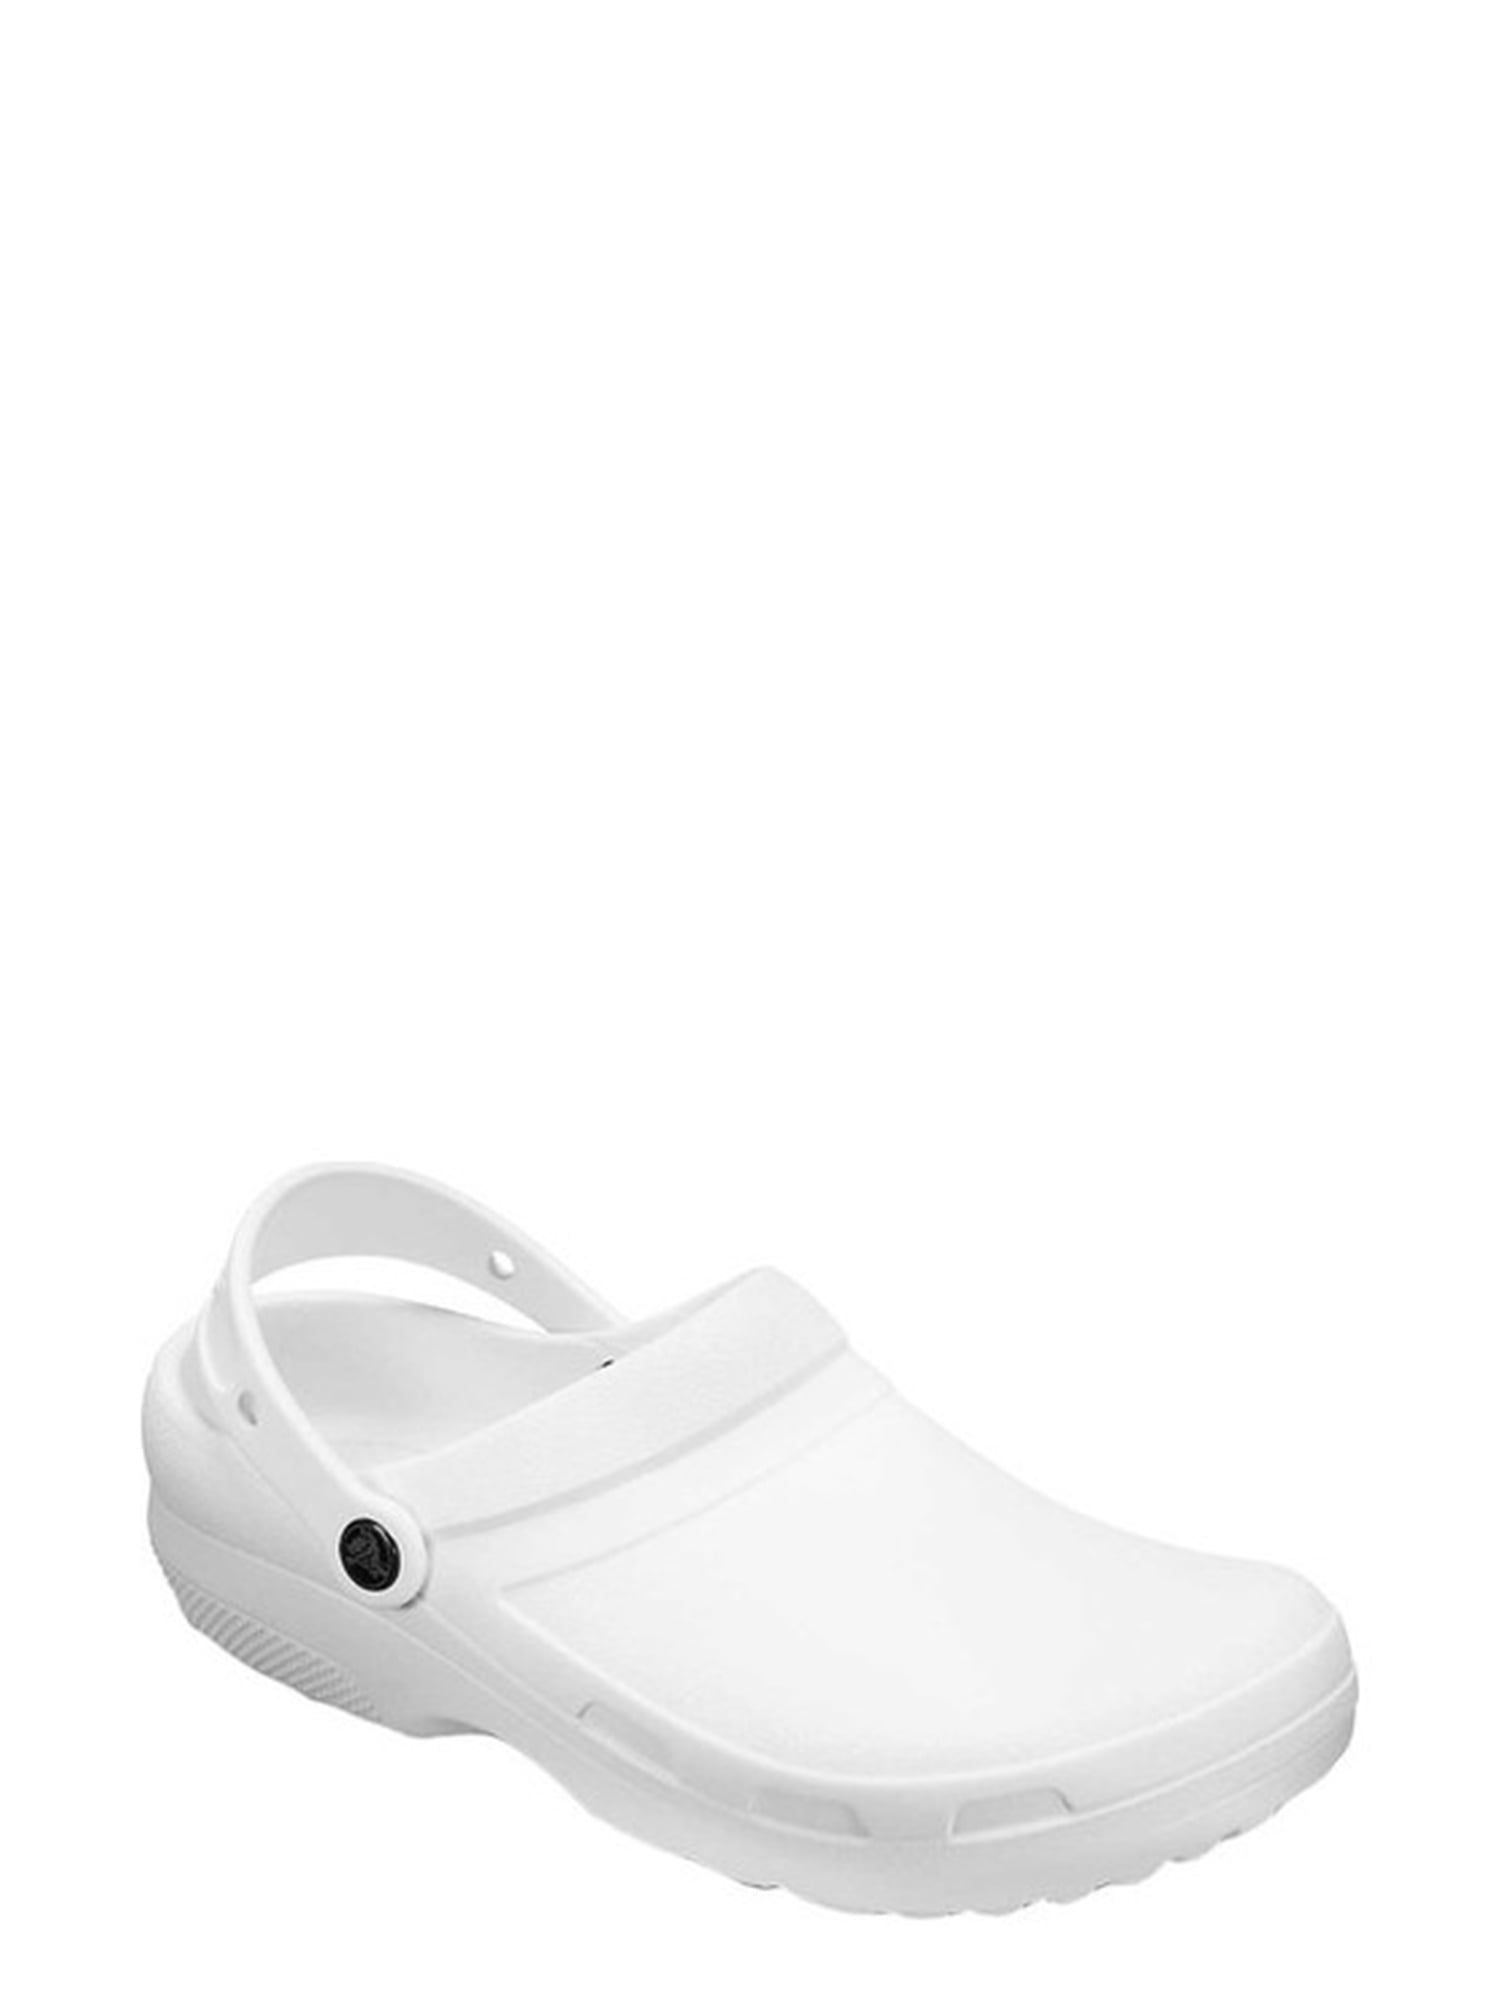 Crocs Unisex-Adult Men's and Women's Specialist II Work Clog (White or Navy, Various Sizes) $22.99 + Free S&H w/ Walmart+ or $35+